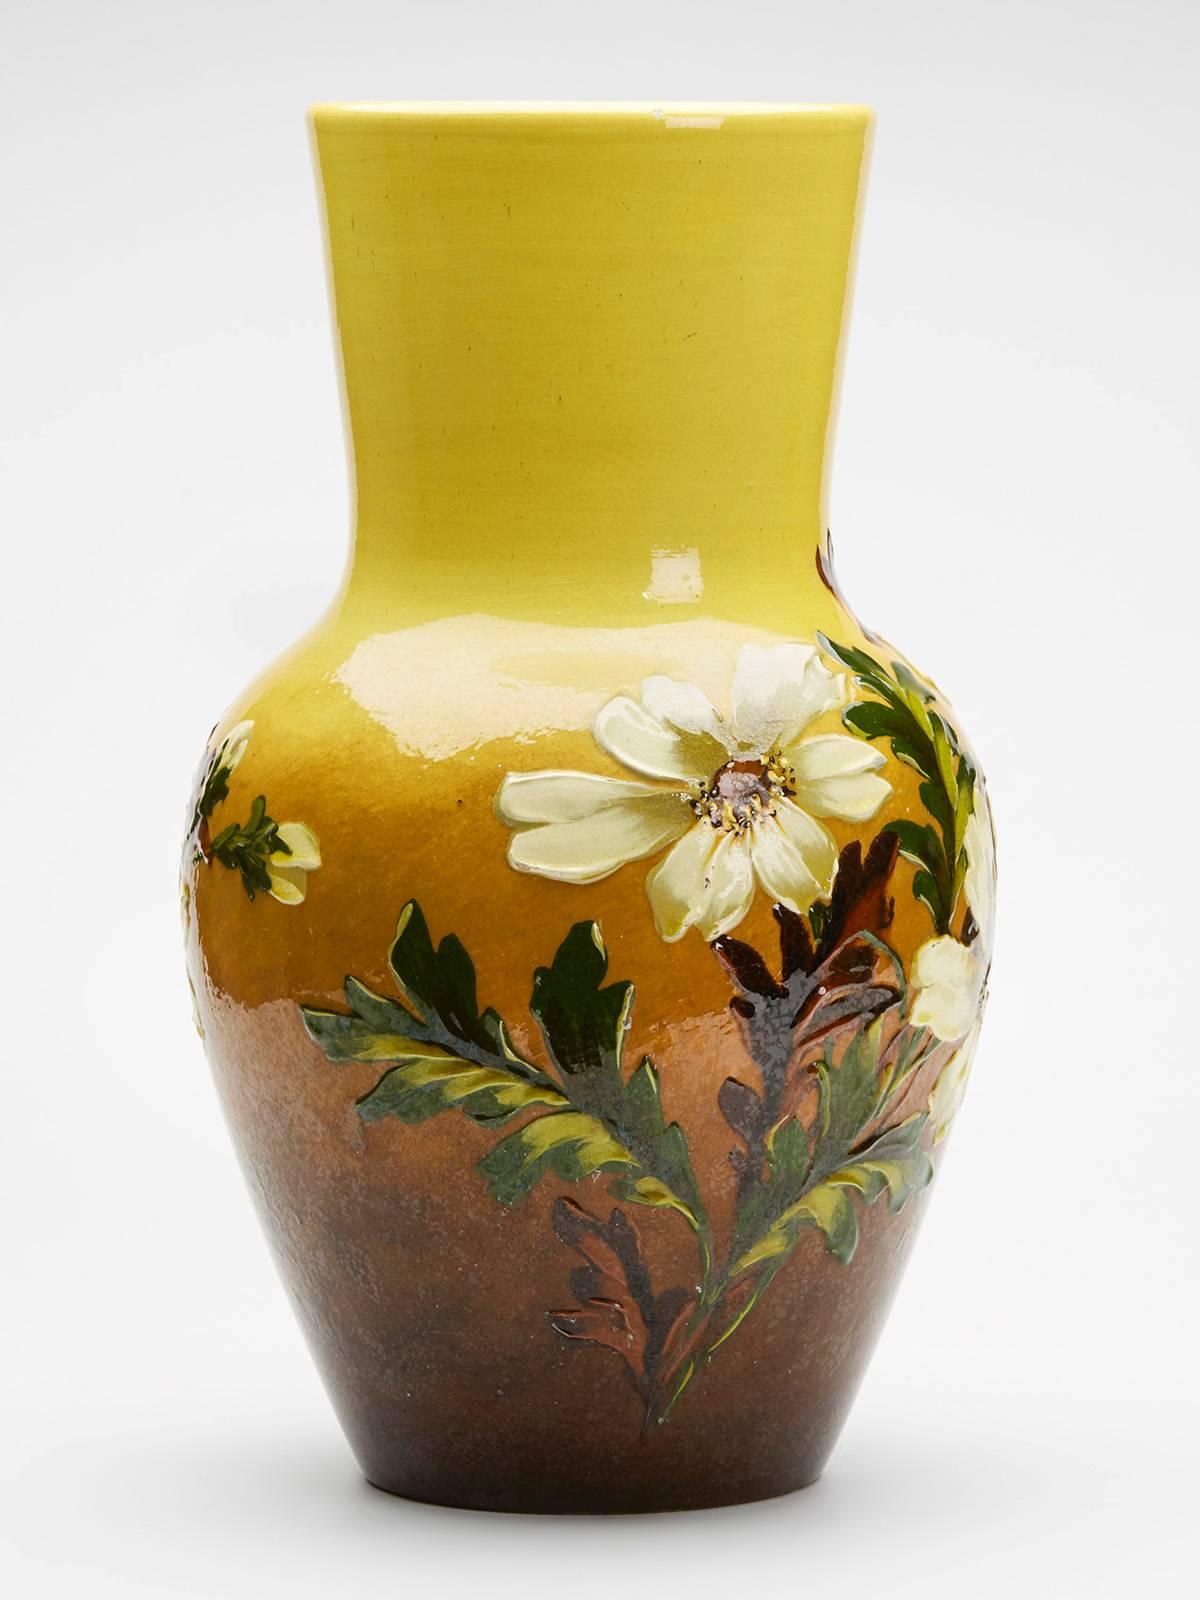 A large Arts & Crafts Burmantofts art pottery faience vase richly painted in thick glazes with floral designs on a graduating yellow and brown ground. The earthenware baluster vase has a wide funnel shaped top with a slight trumpet shape and the